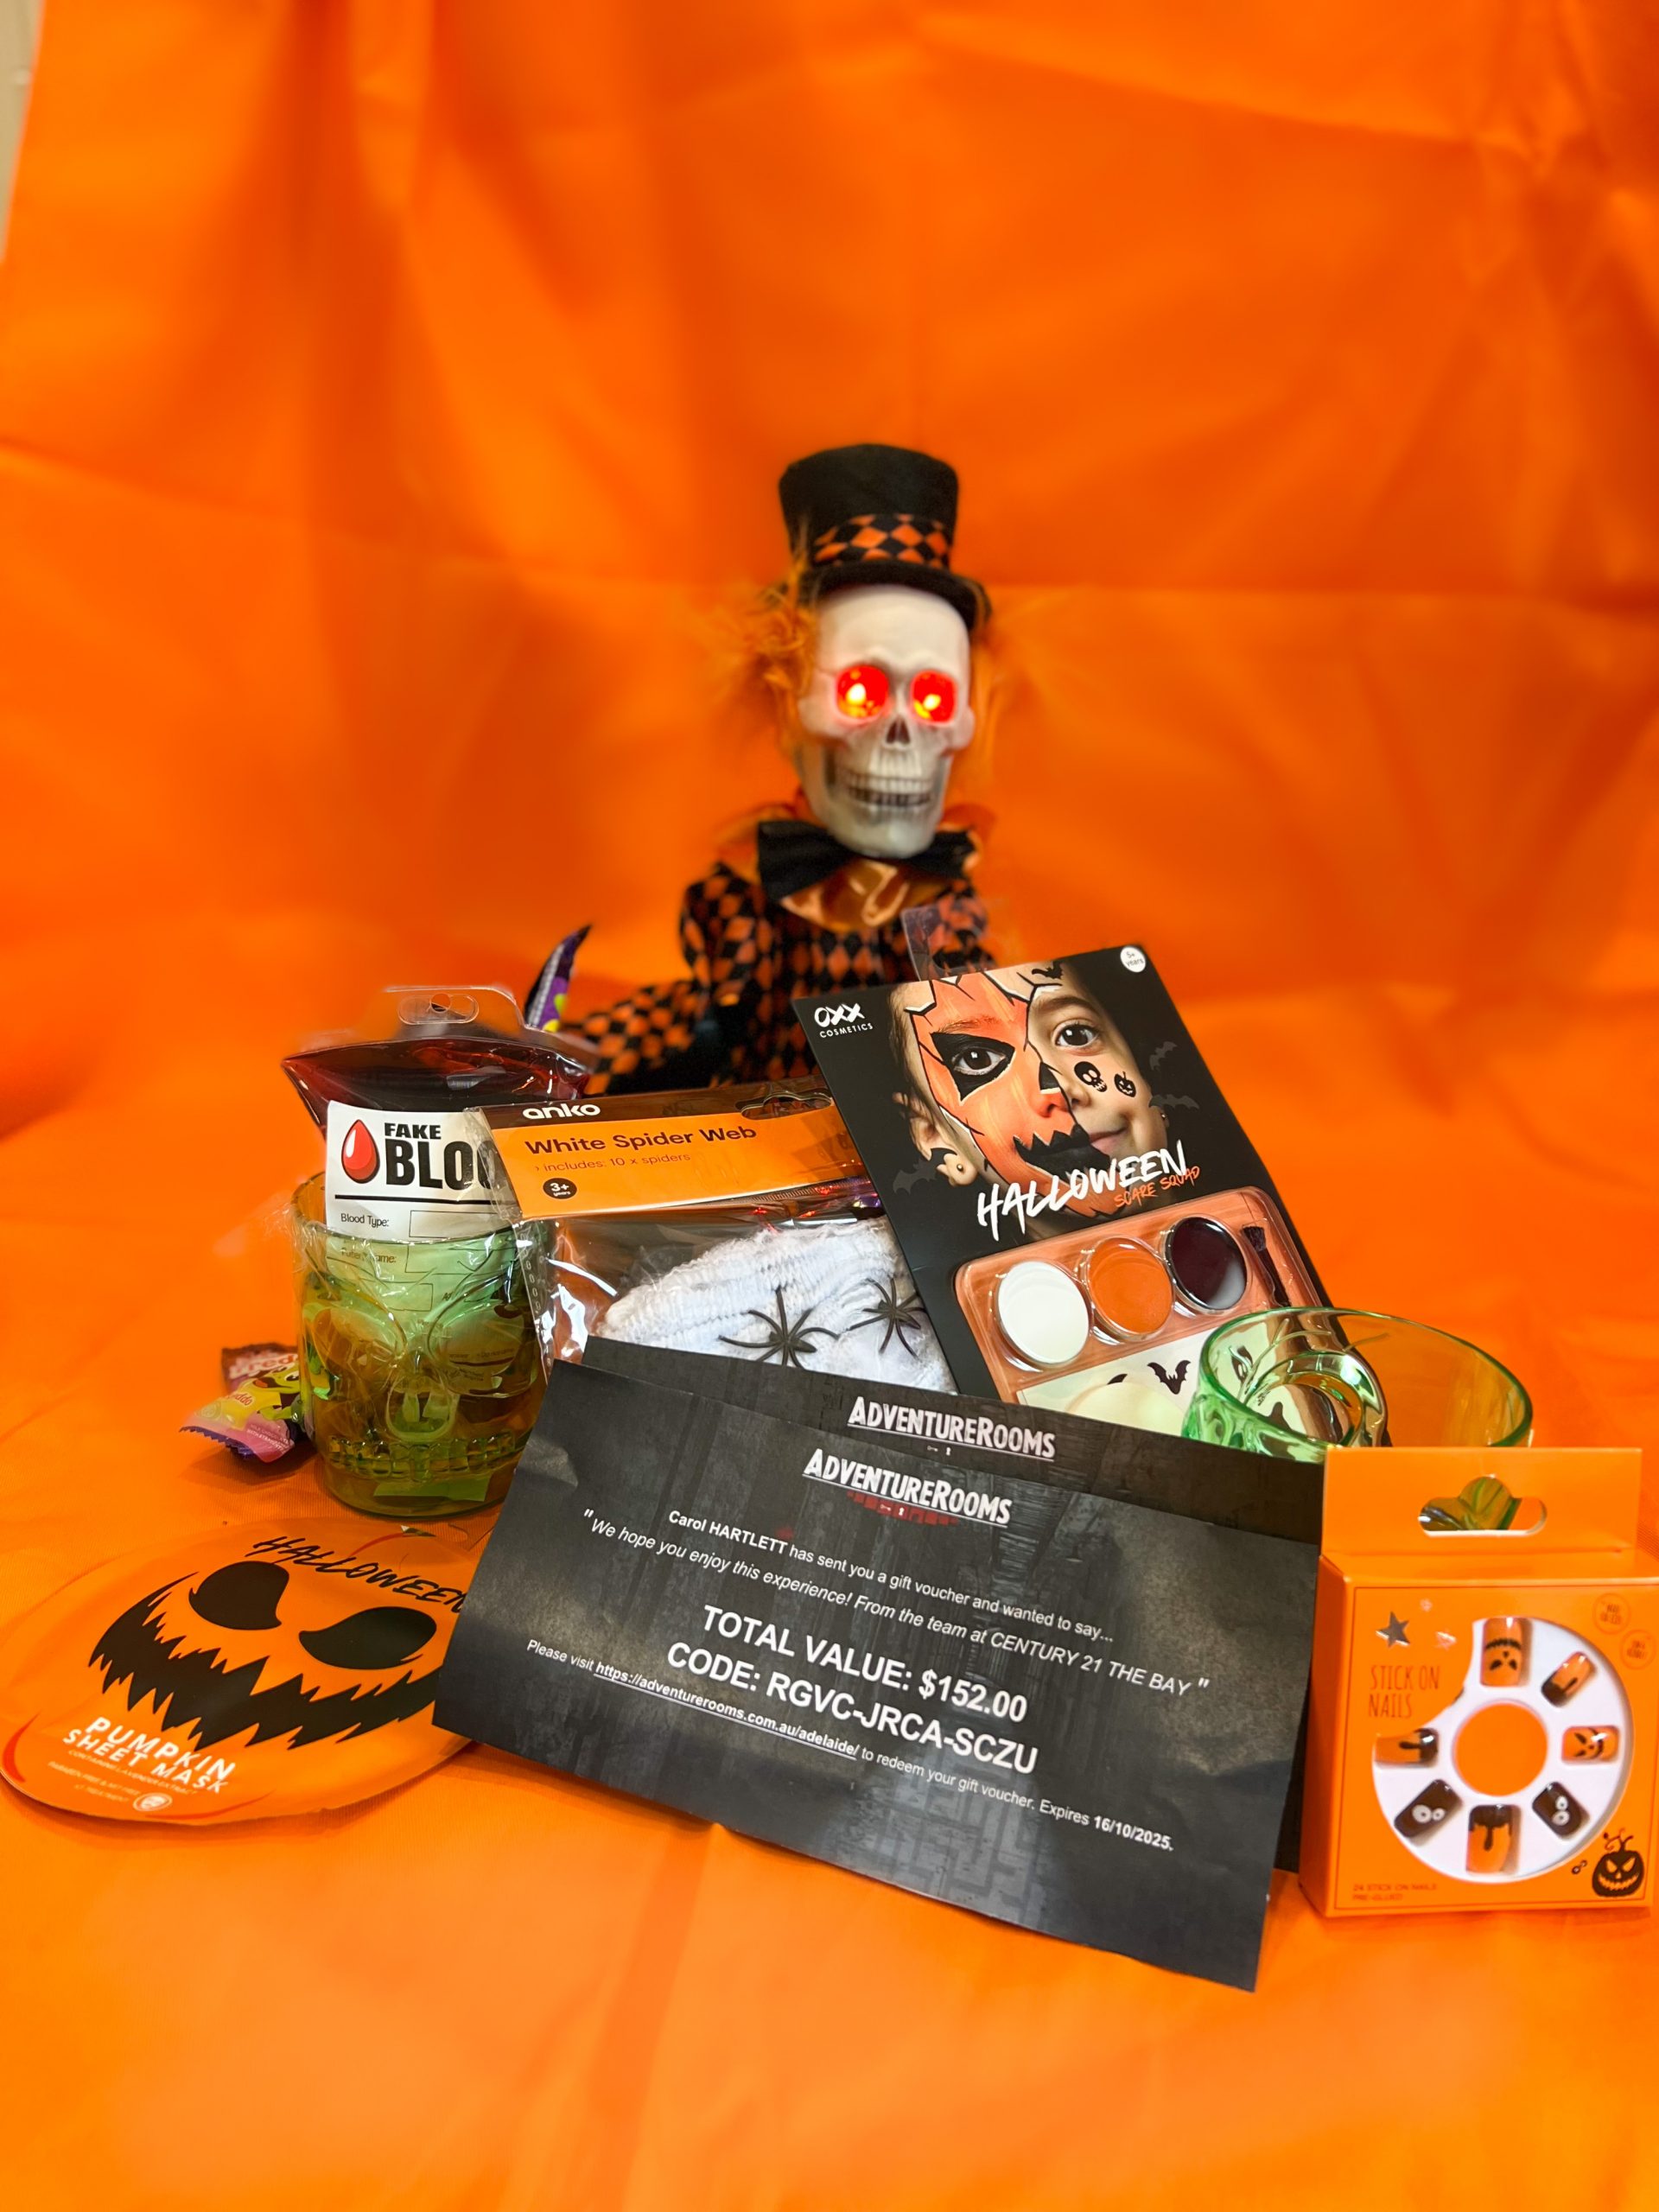 WIN An Adventure Room Experience + A Spooky Gift Basket Thanks To Century 21 The Bay!